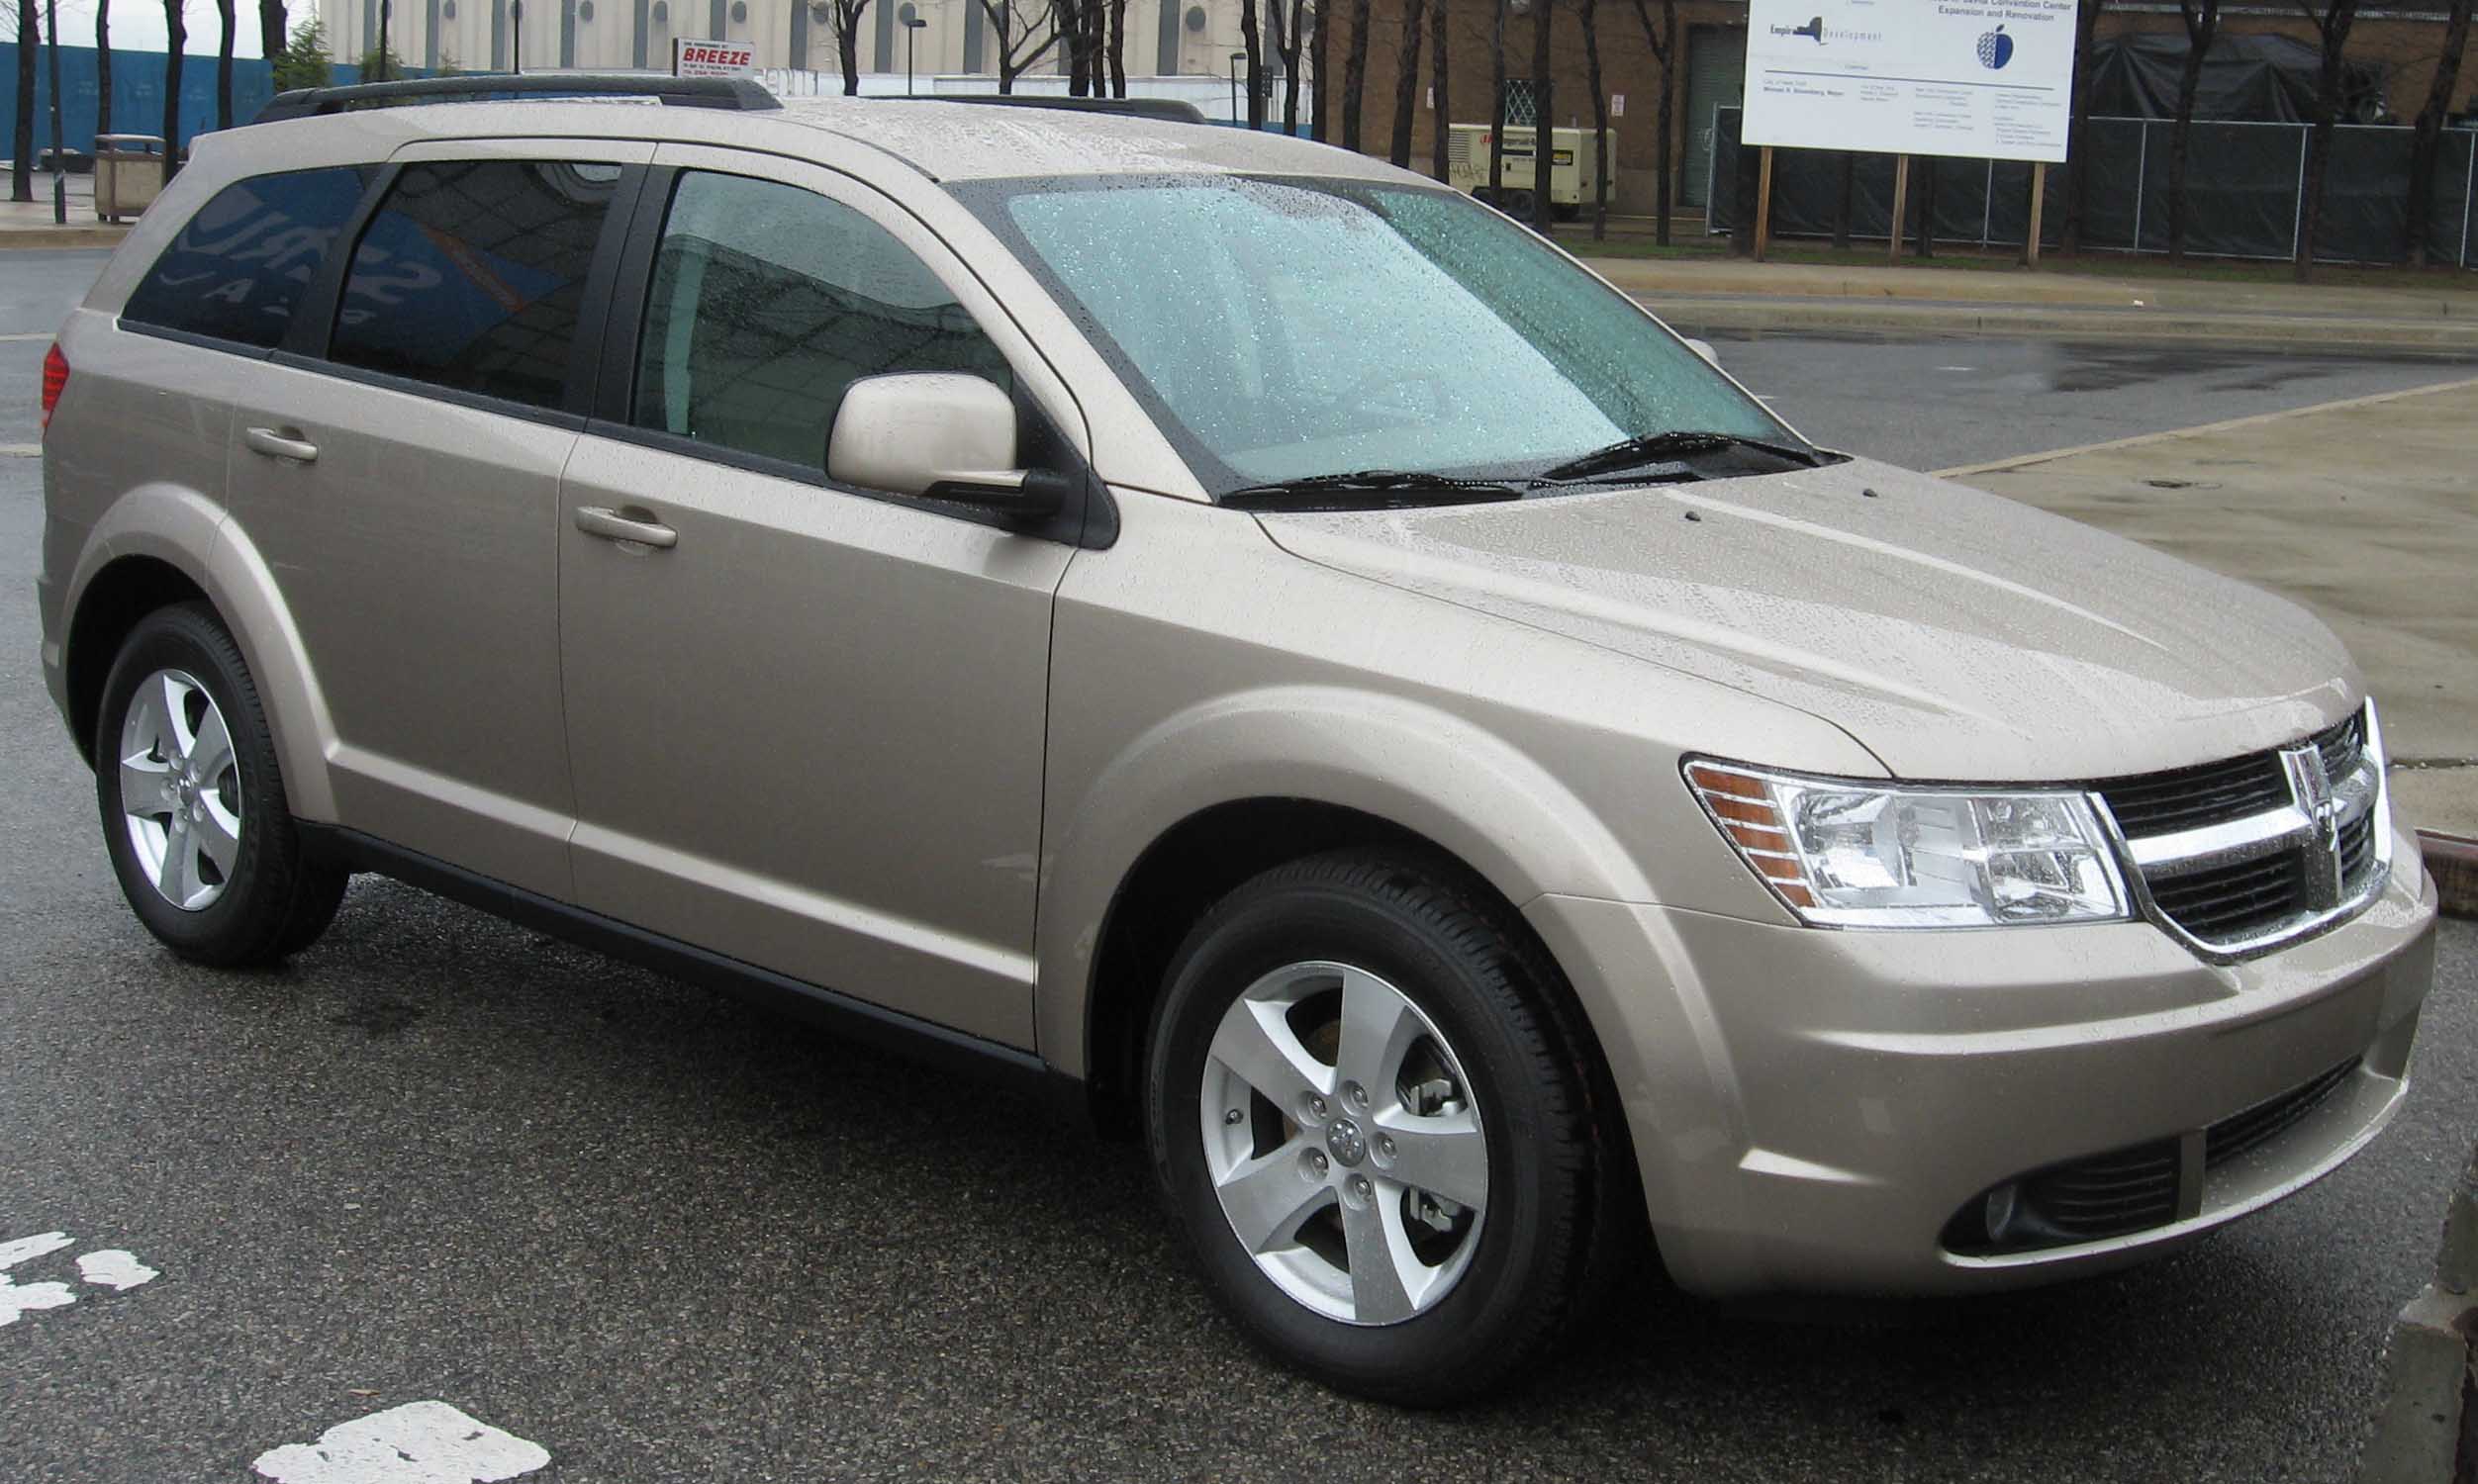 Dodge Journey, Tractor & Construction Plant Wiki